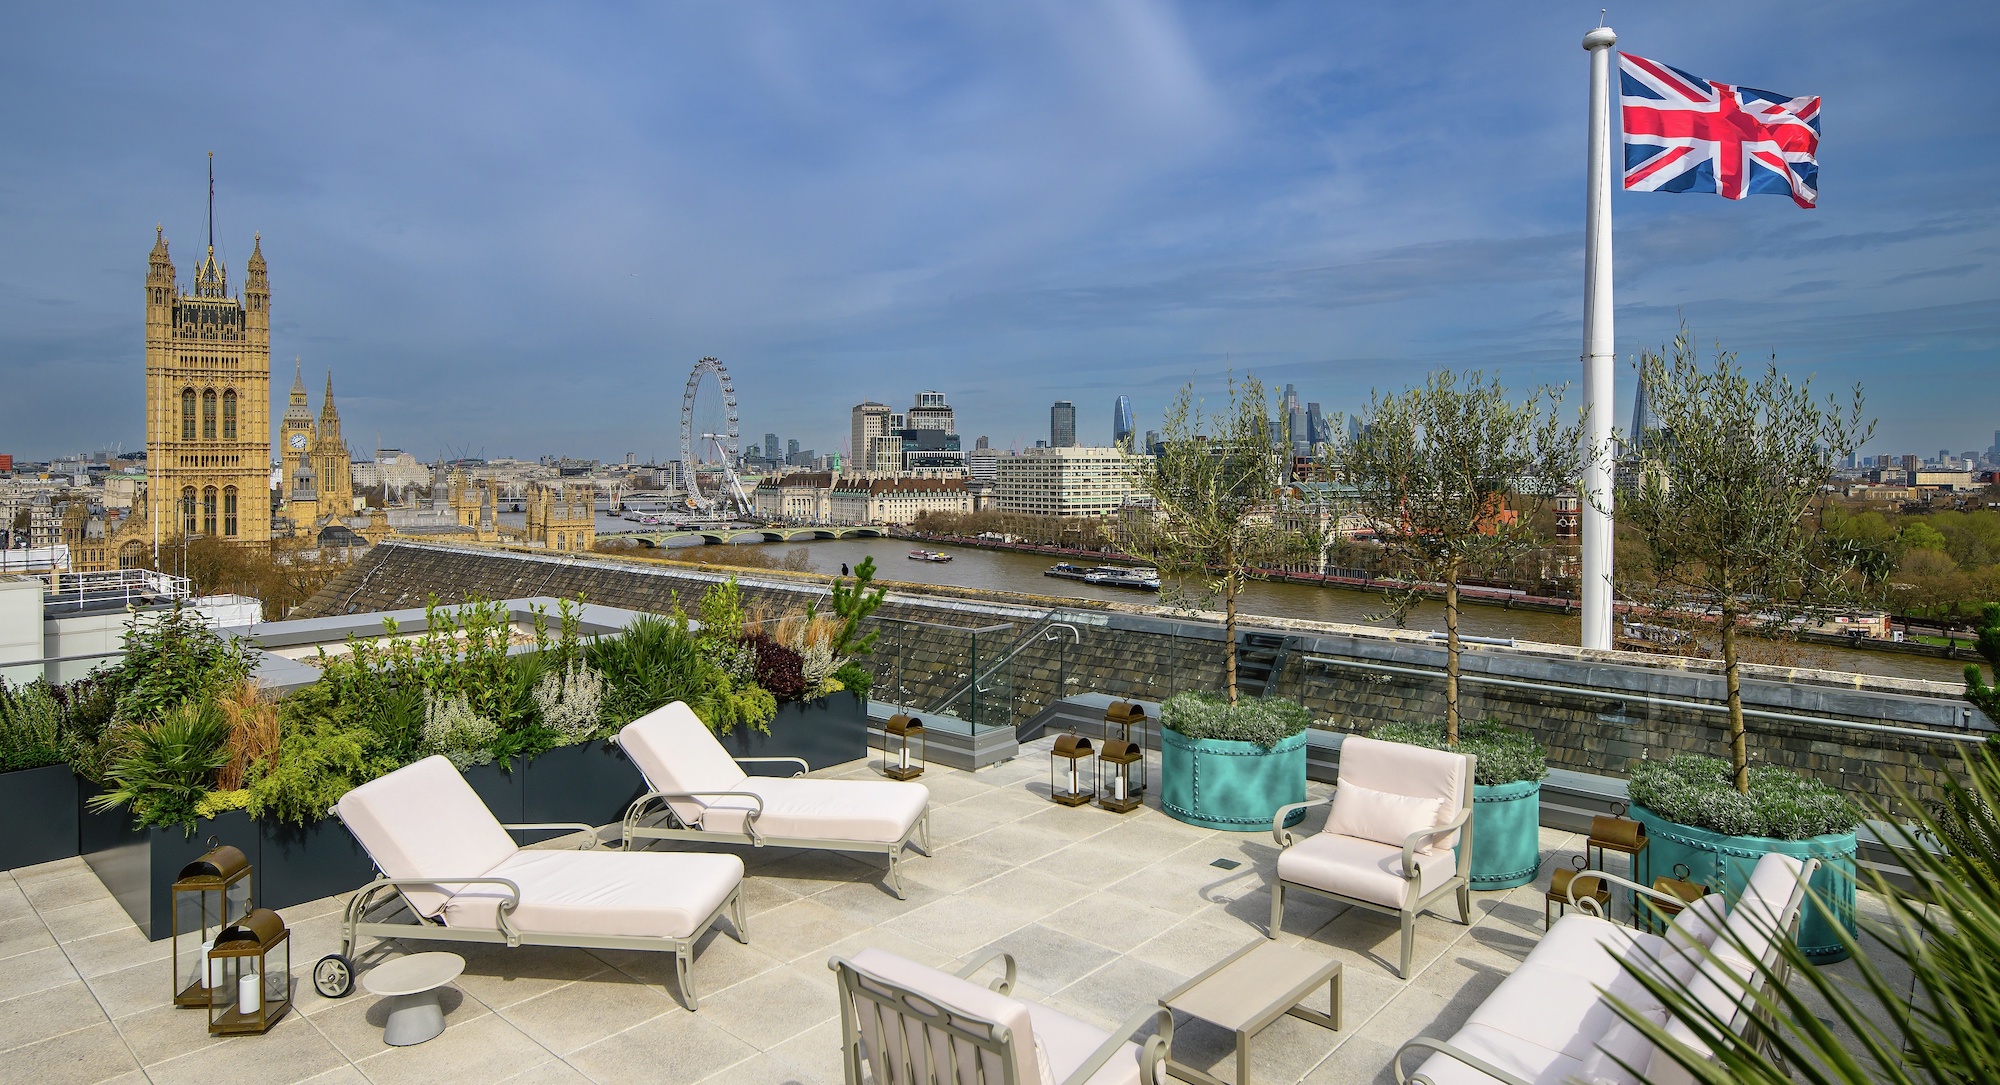 The roof terrace of The Astor is 1,184 square feet, and overlooks key London landmarks including the London Eye, Big Ben and the Palace of Westminster